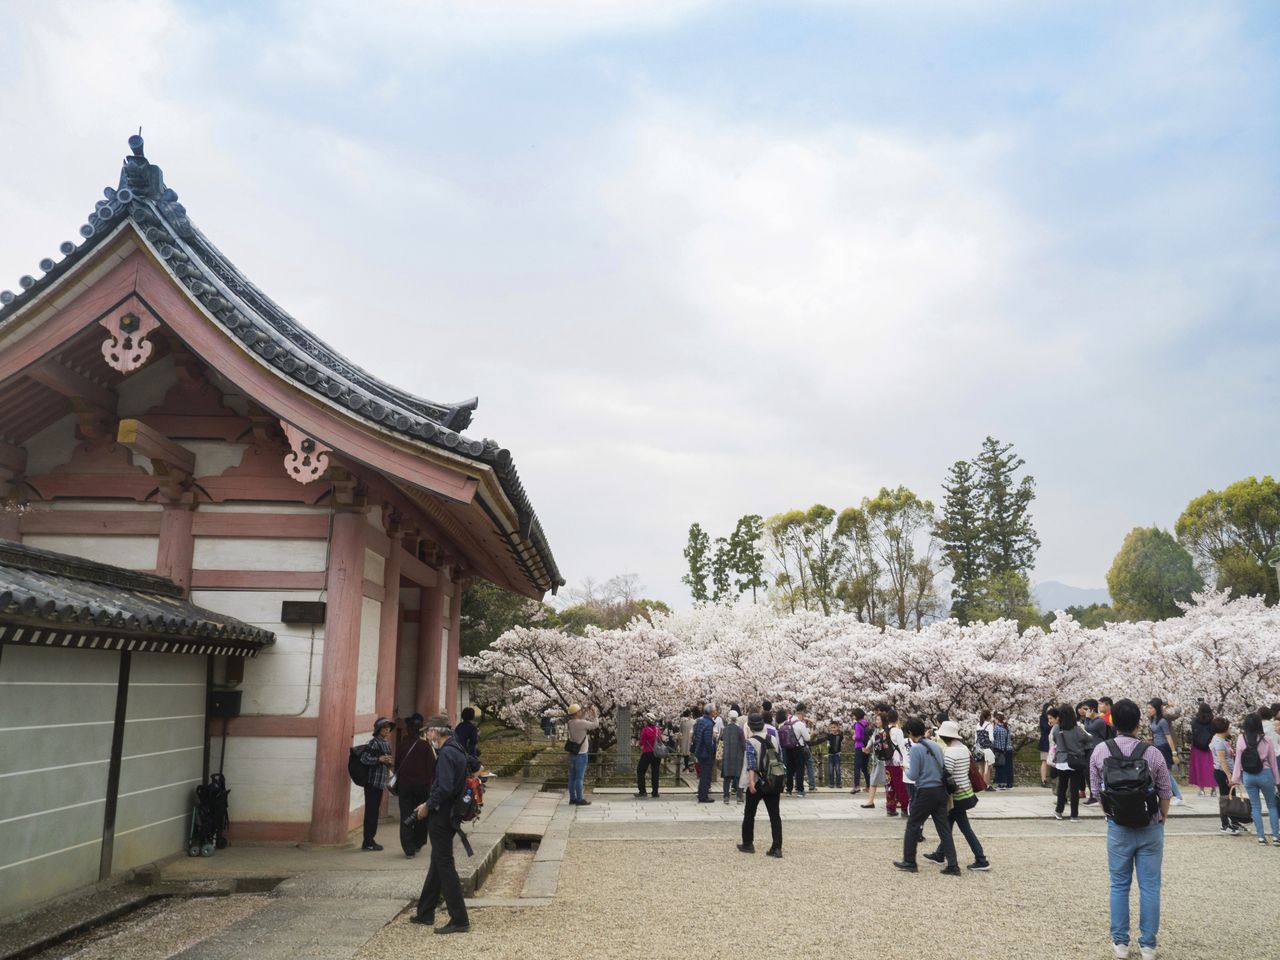 To the west past the Chūmon is an area full of <em>omuro-zakura</em> trees in bloom.